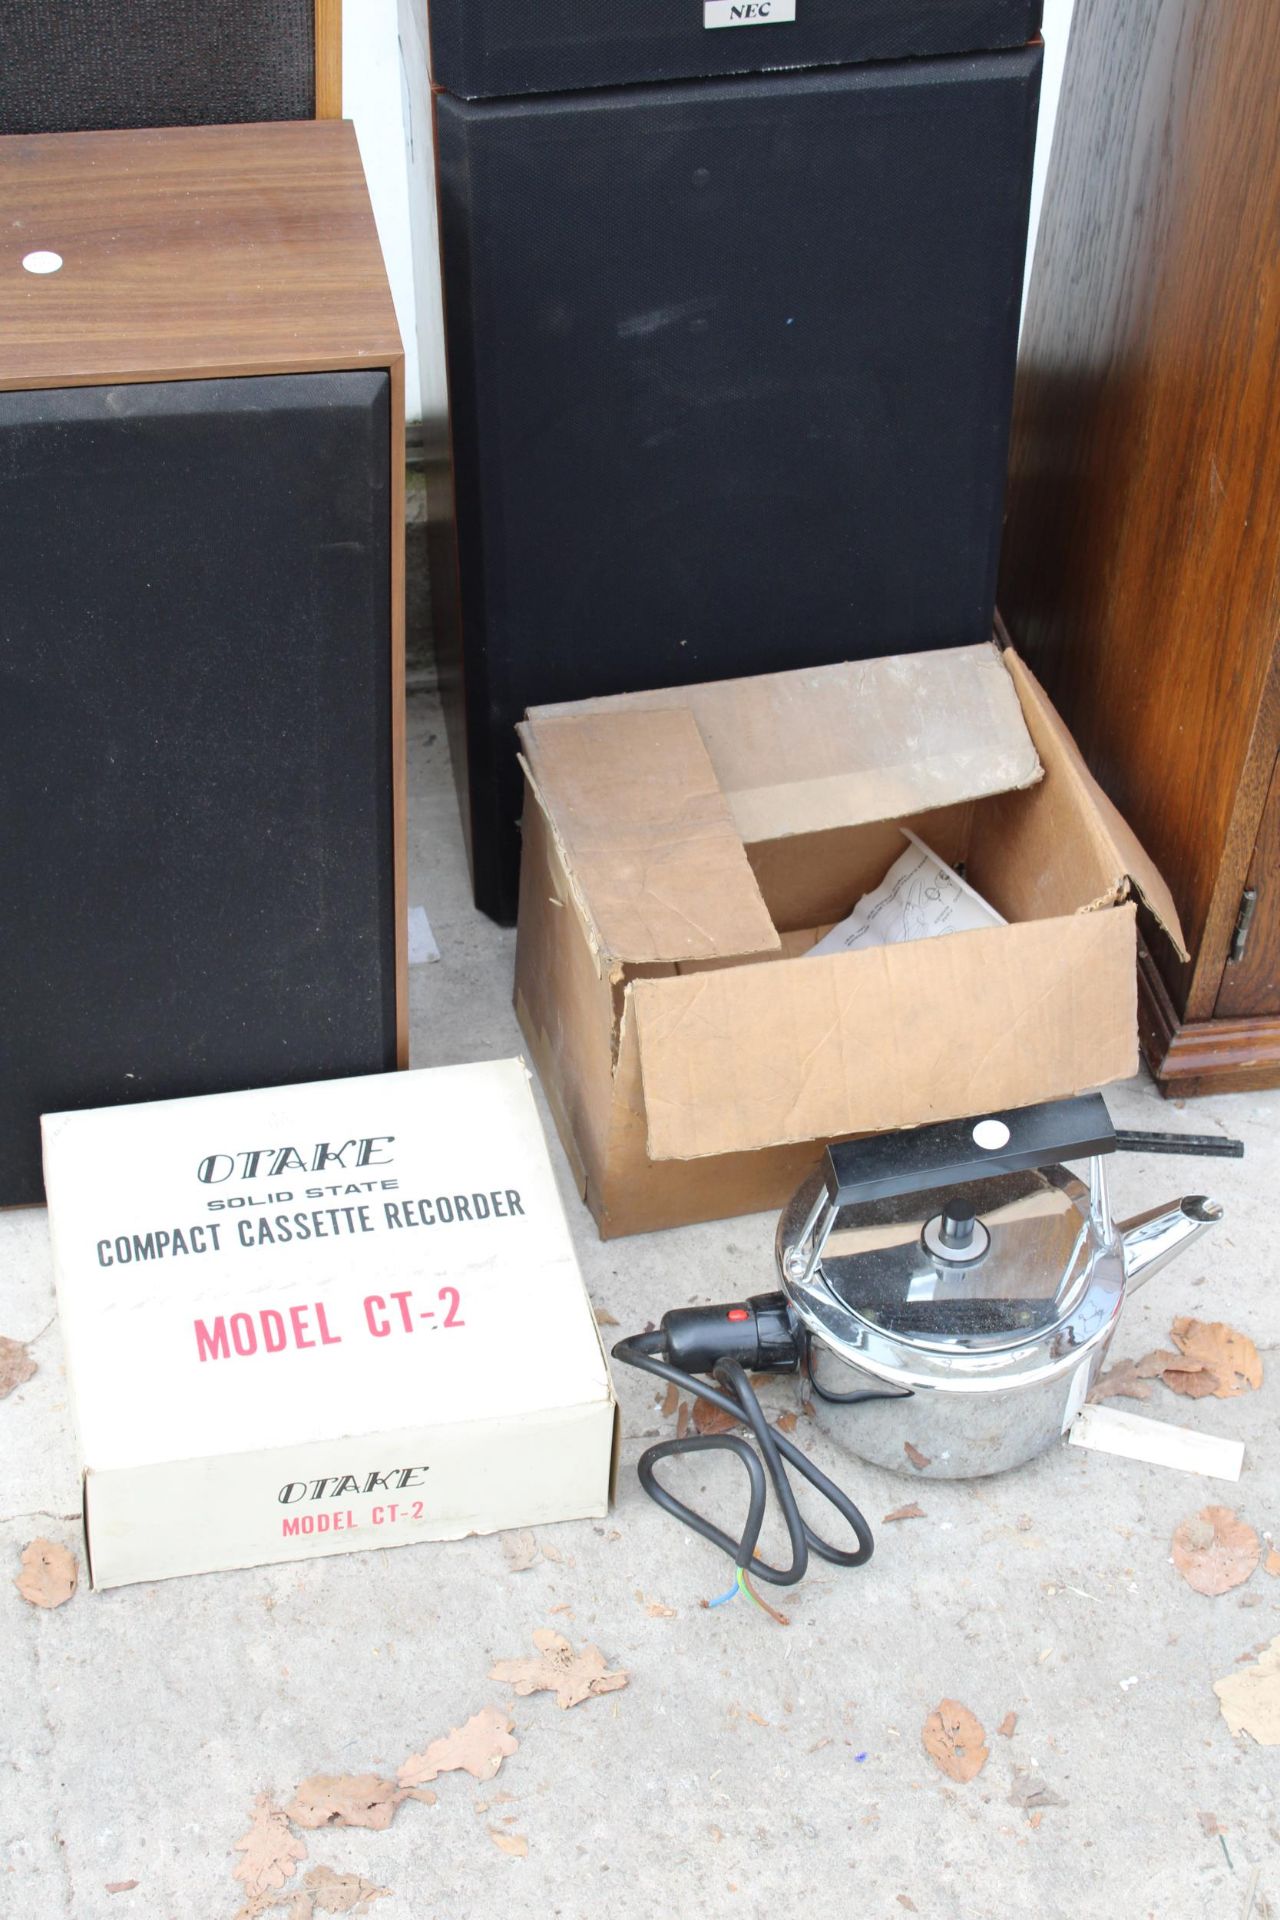 VARIOUS ITEMS TO INC;UDE FOUR LARGE SPEAKERS, A COMPACT CASSETTE RECORDER AND A KETTLE - Image 2 of 2